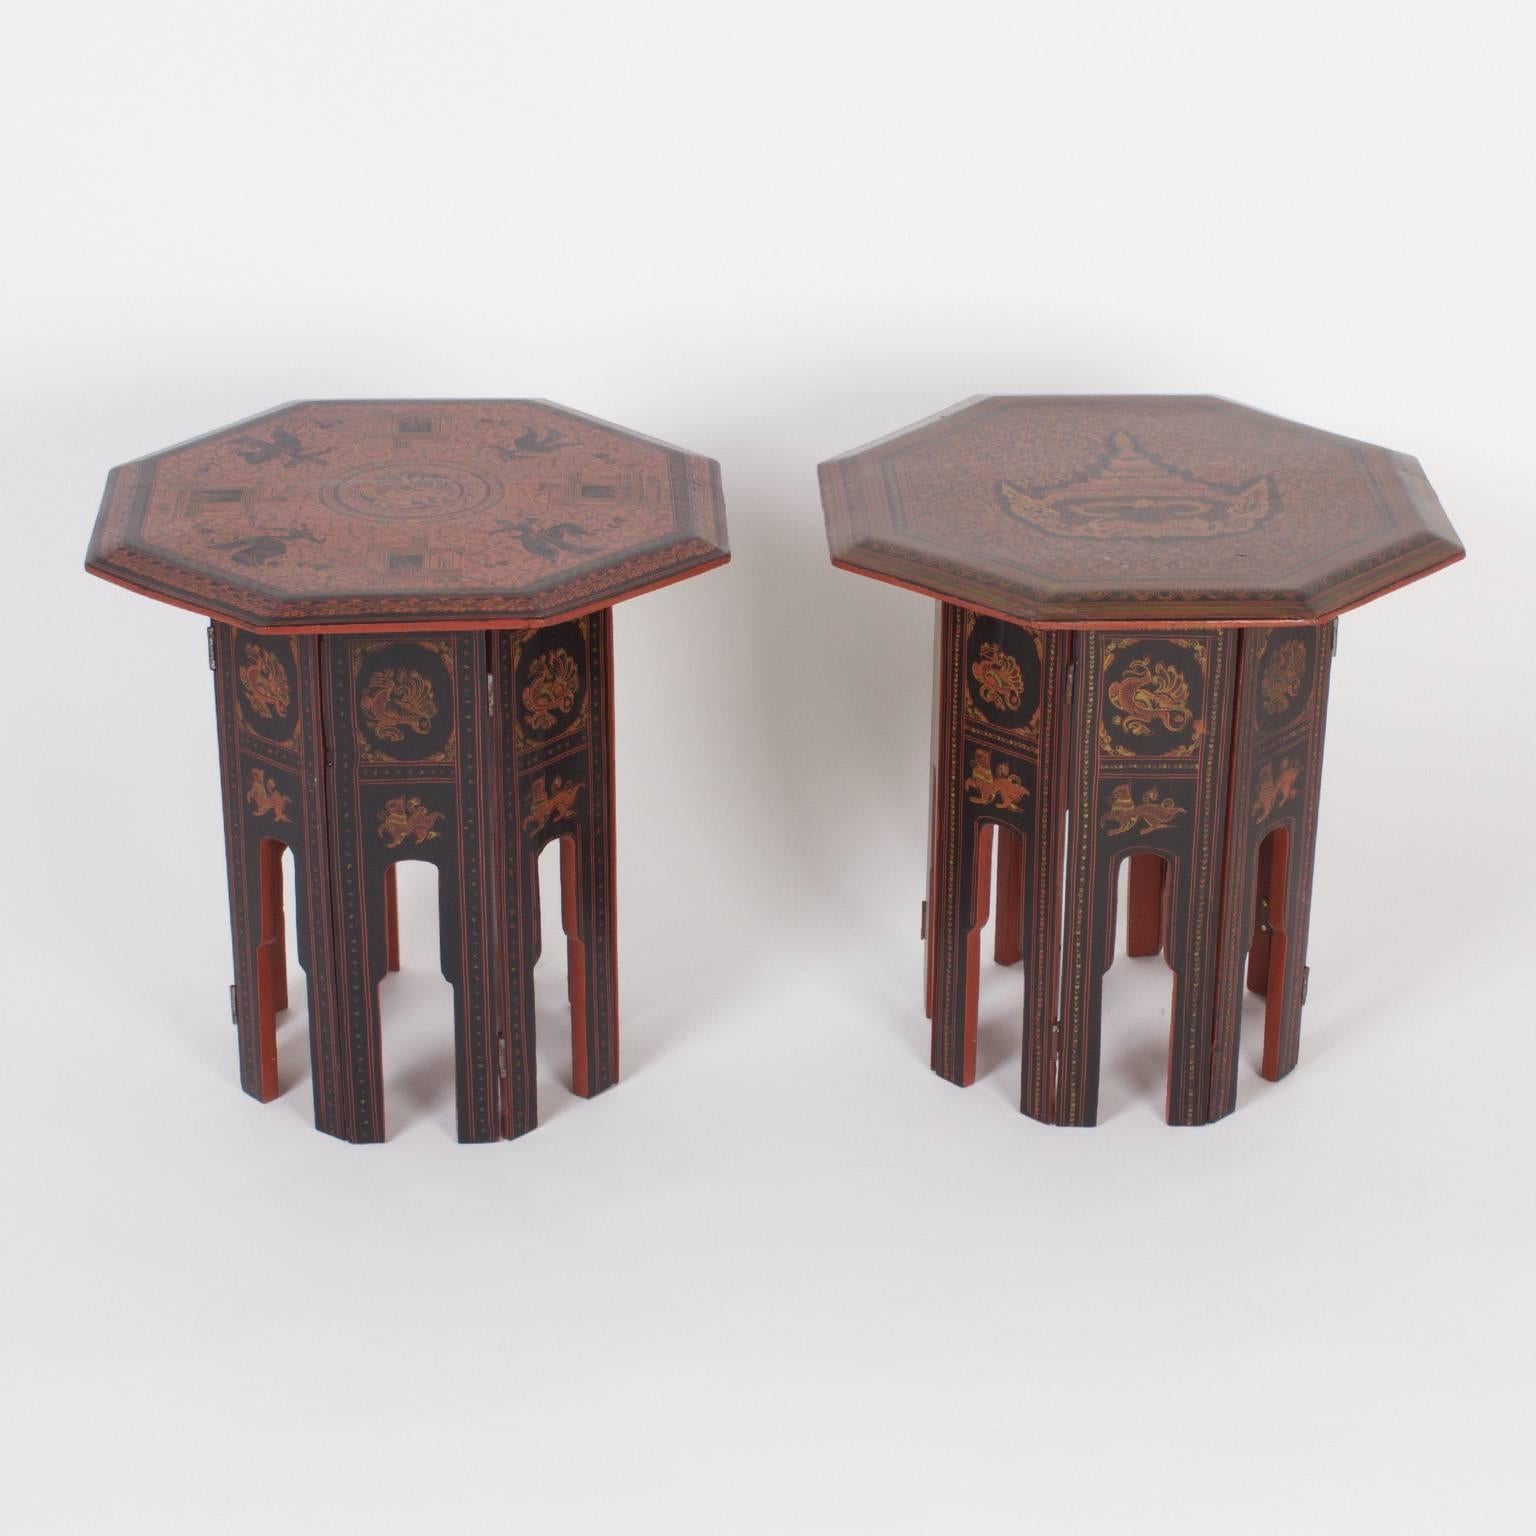 Rare pair of Burmese end or occasional tables with octagon tops both with hand painted intricate floral and geometric fields and a cast of symbolic, spiritual characters. The  bases have an architectural element and are decorated with the same